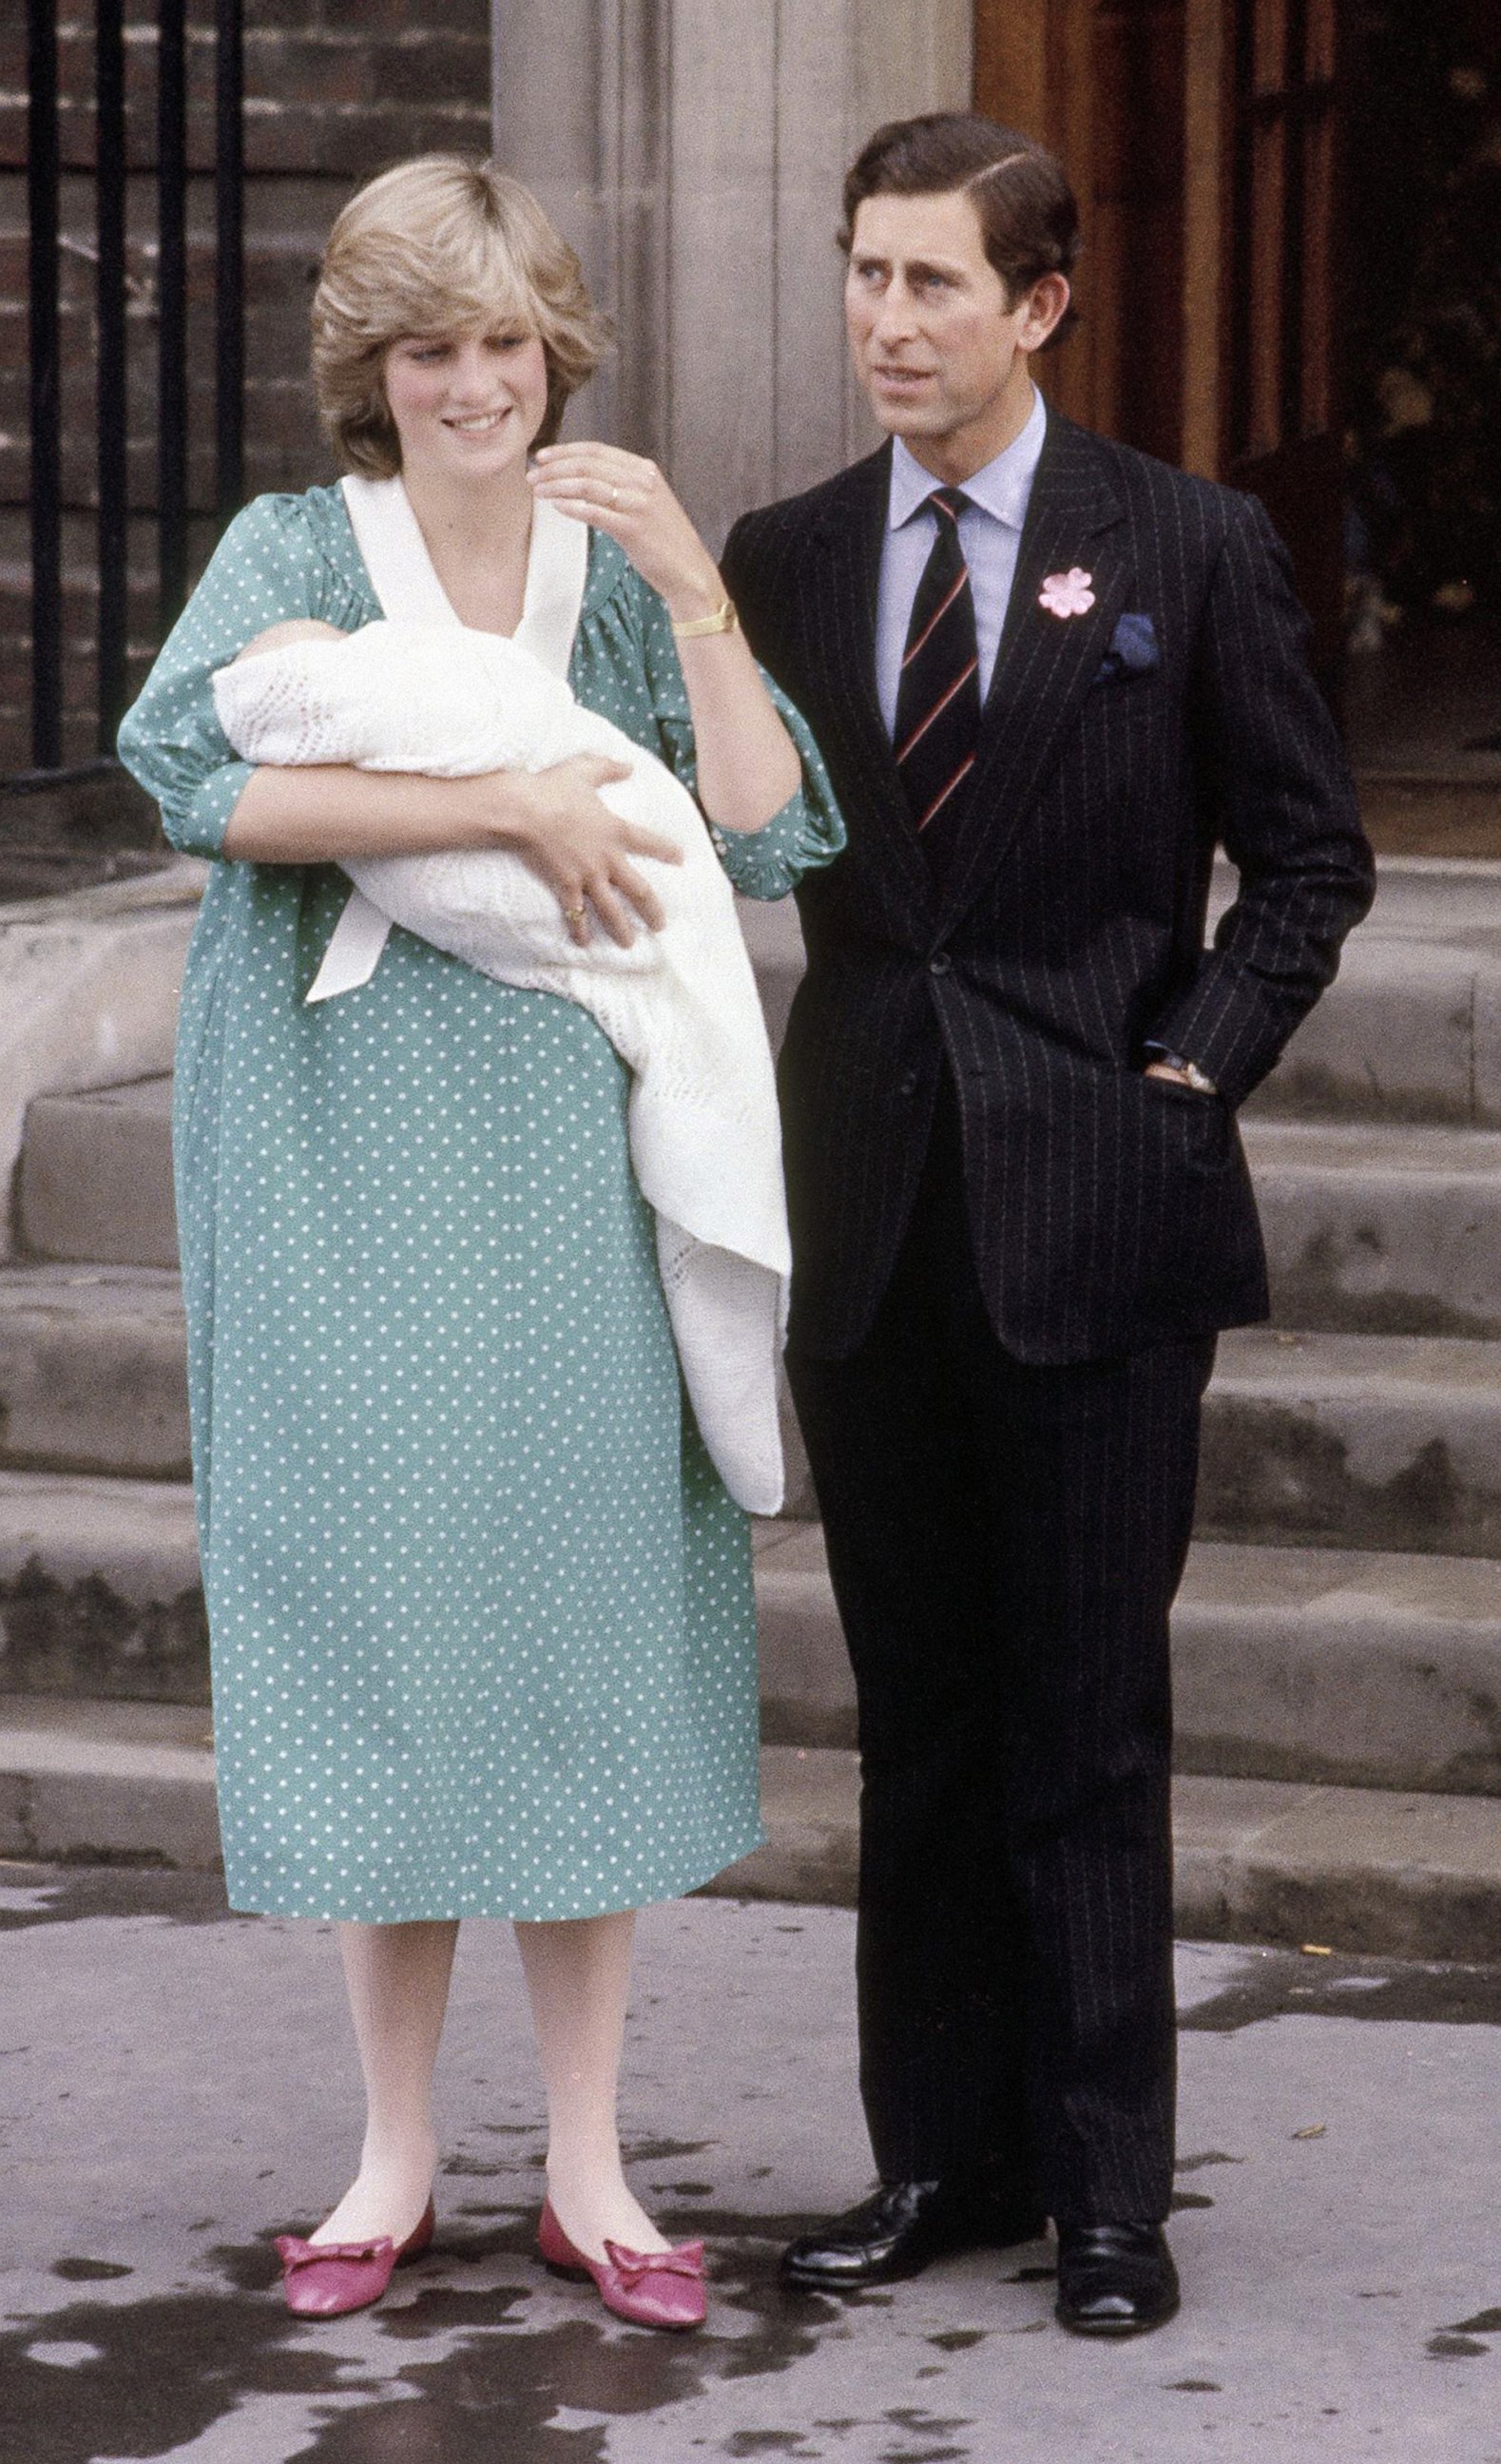 PHOTO: Princess Diana holds her newborn son Prince William as they leave St. Mary's Hospital with Prince Charles in London, June 22, 1982.